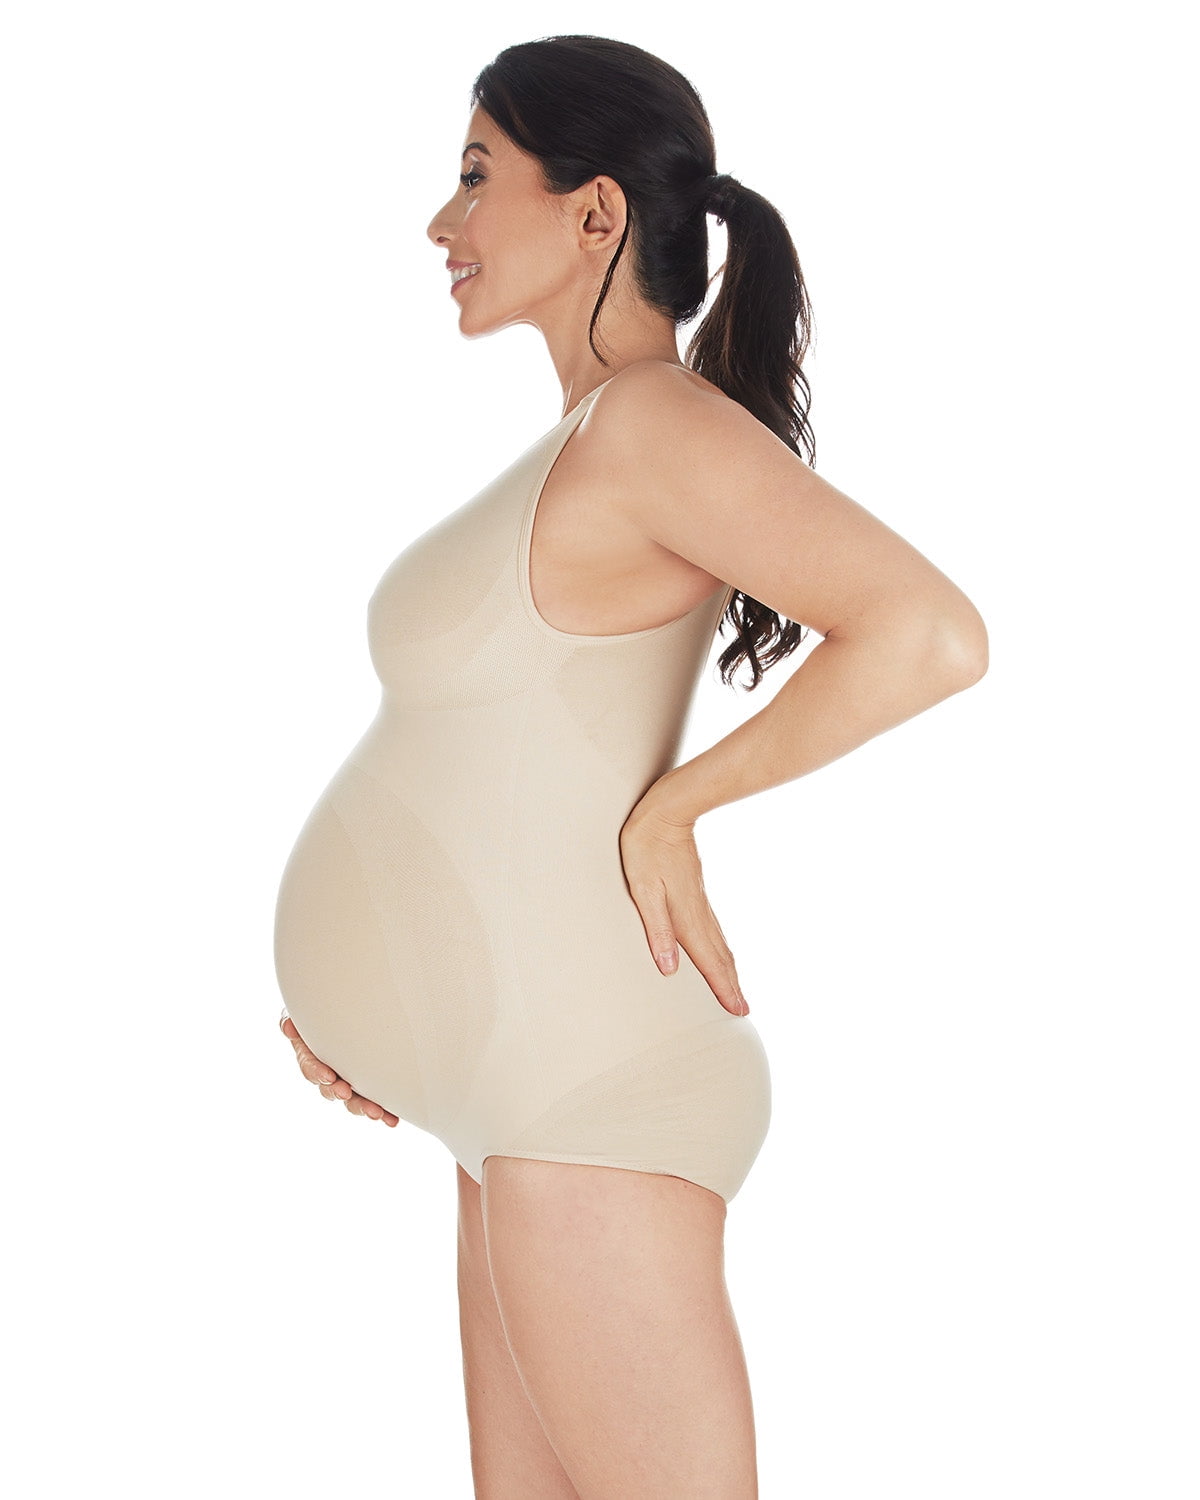 Top Rated Products in Maternity Bottoms